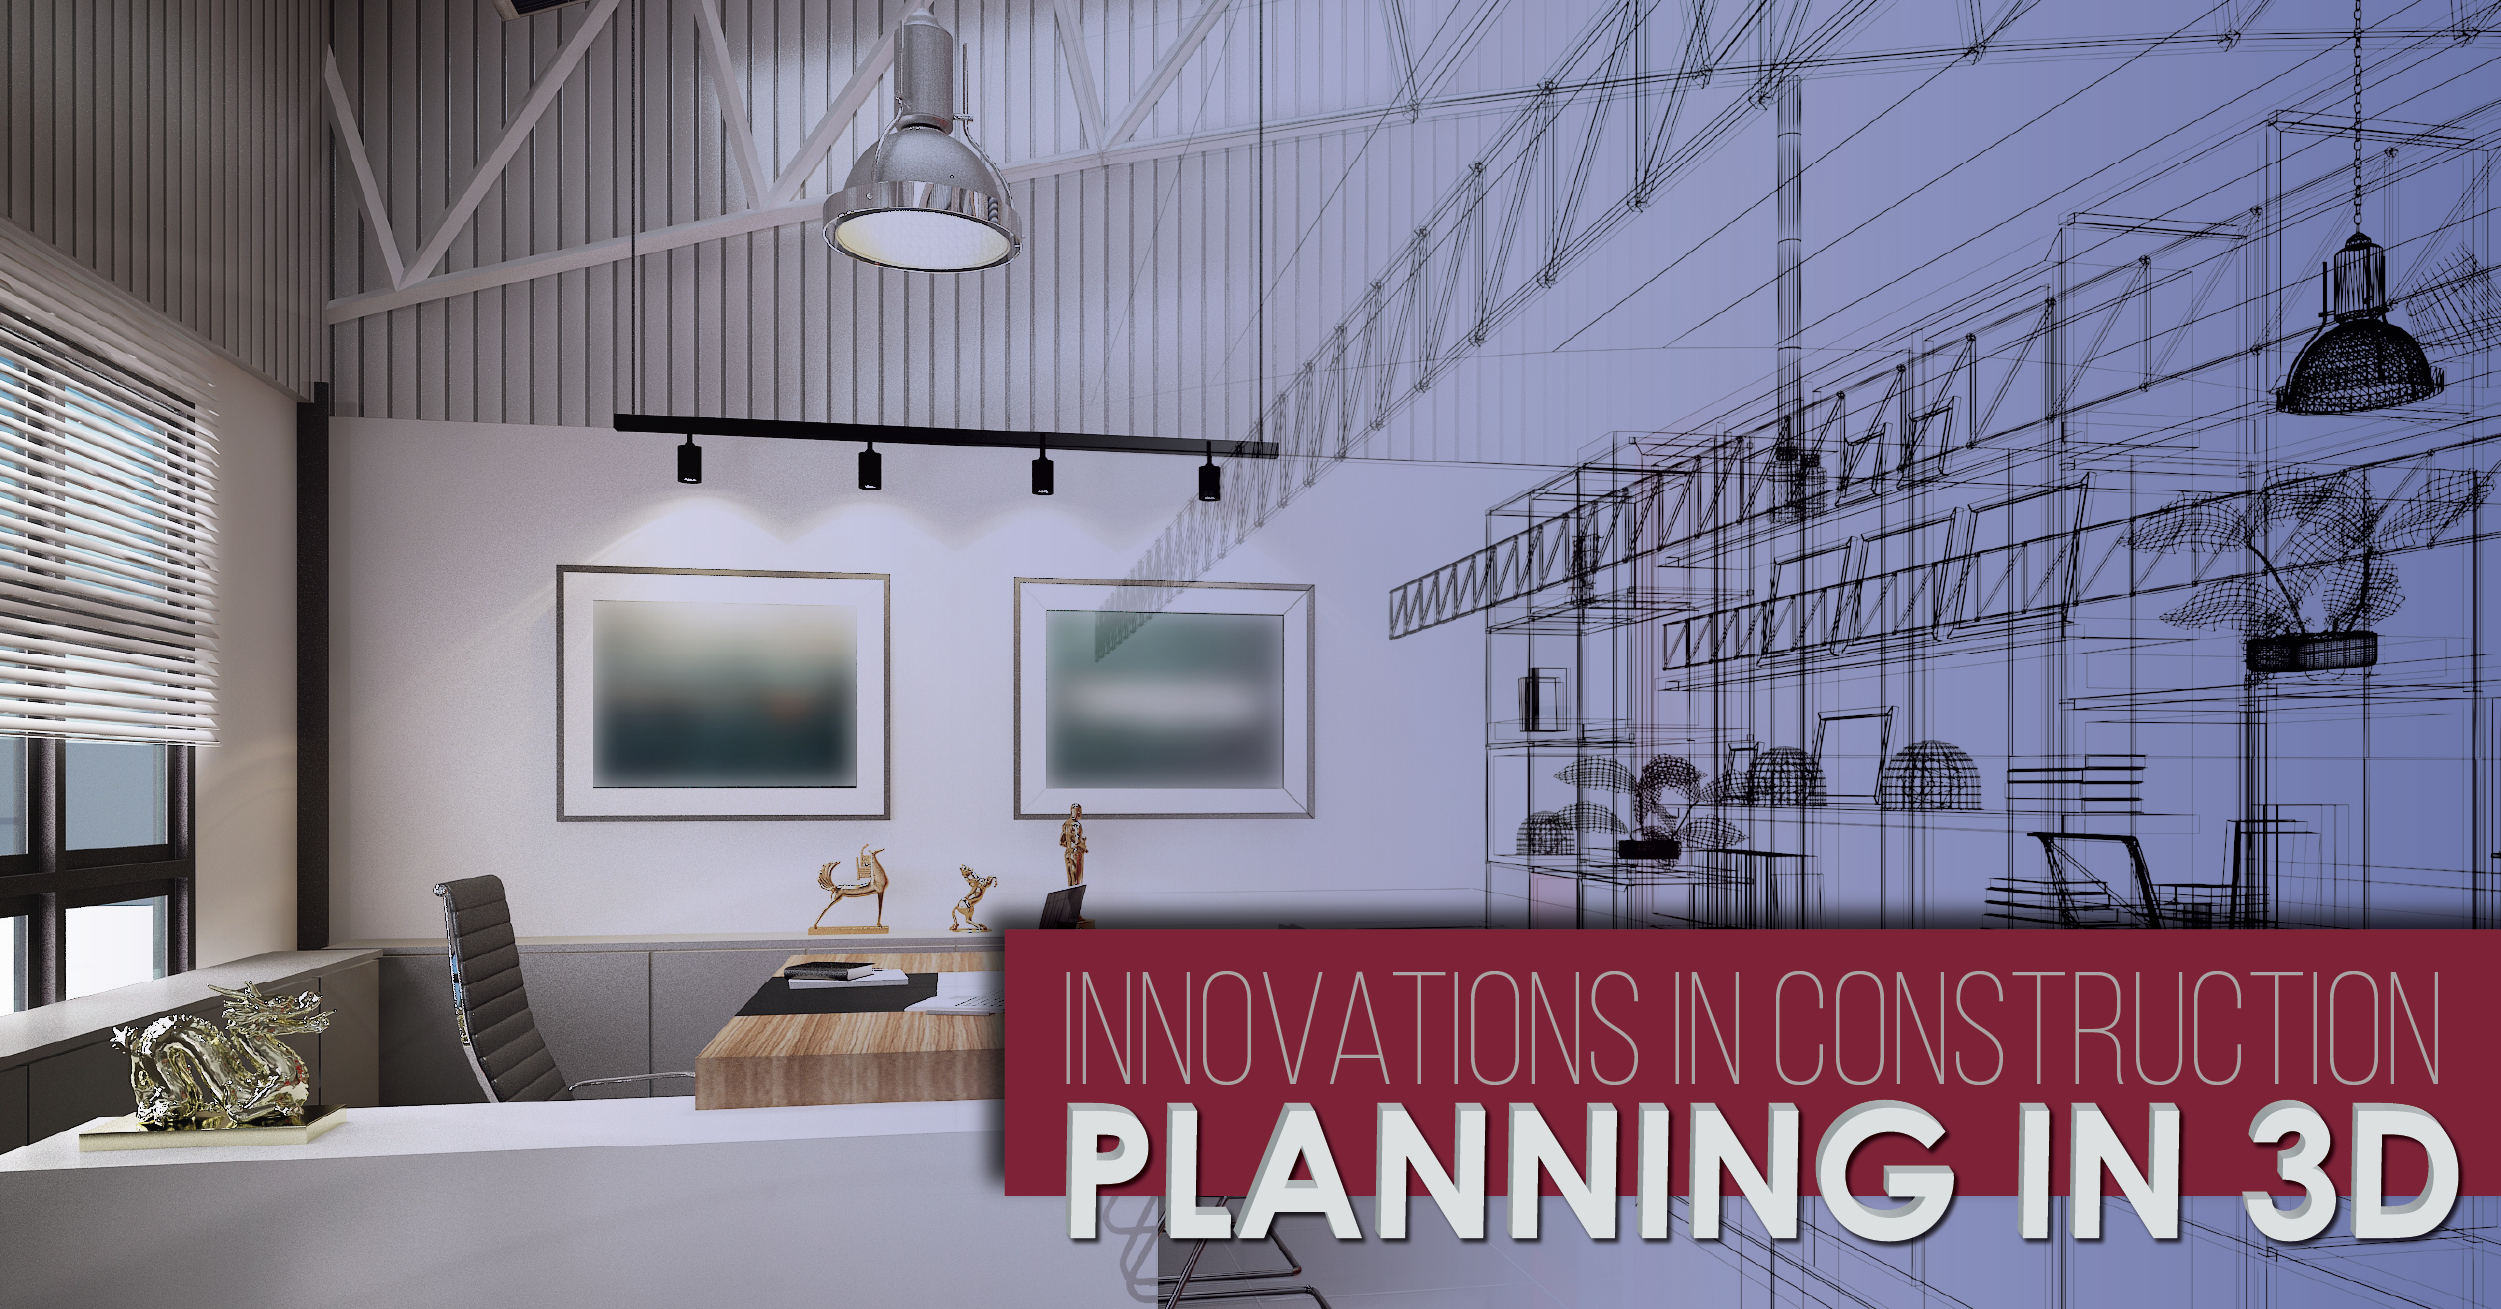 Innovations in Construction - Planning in 3D